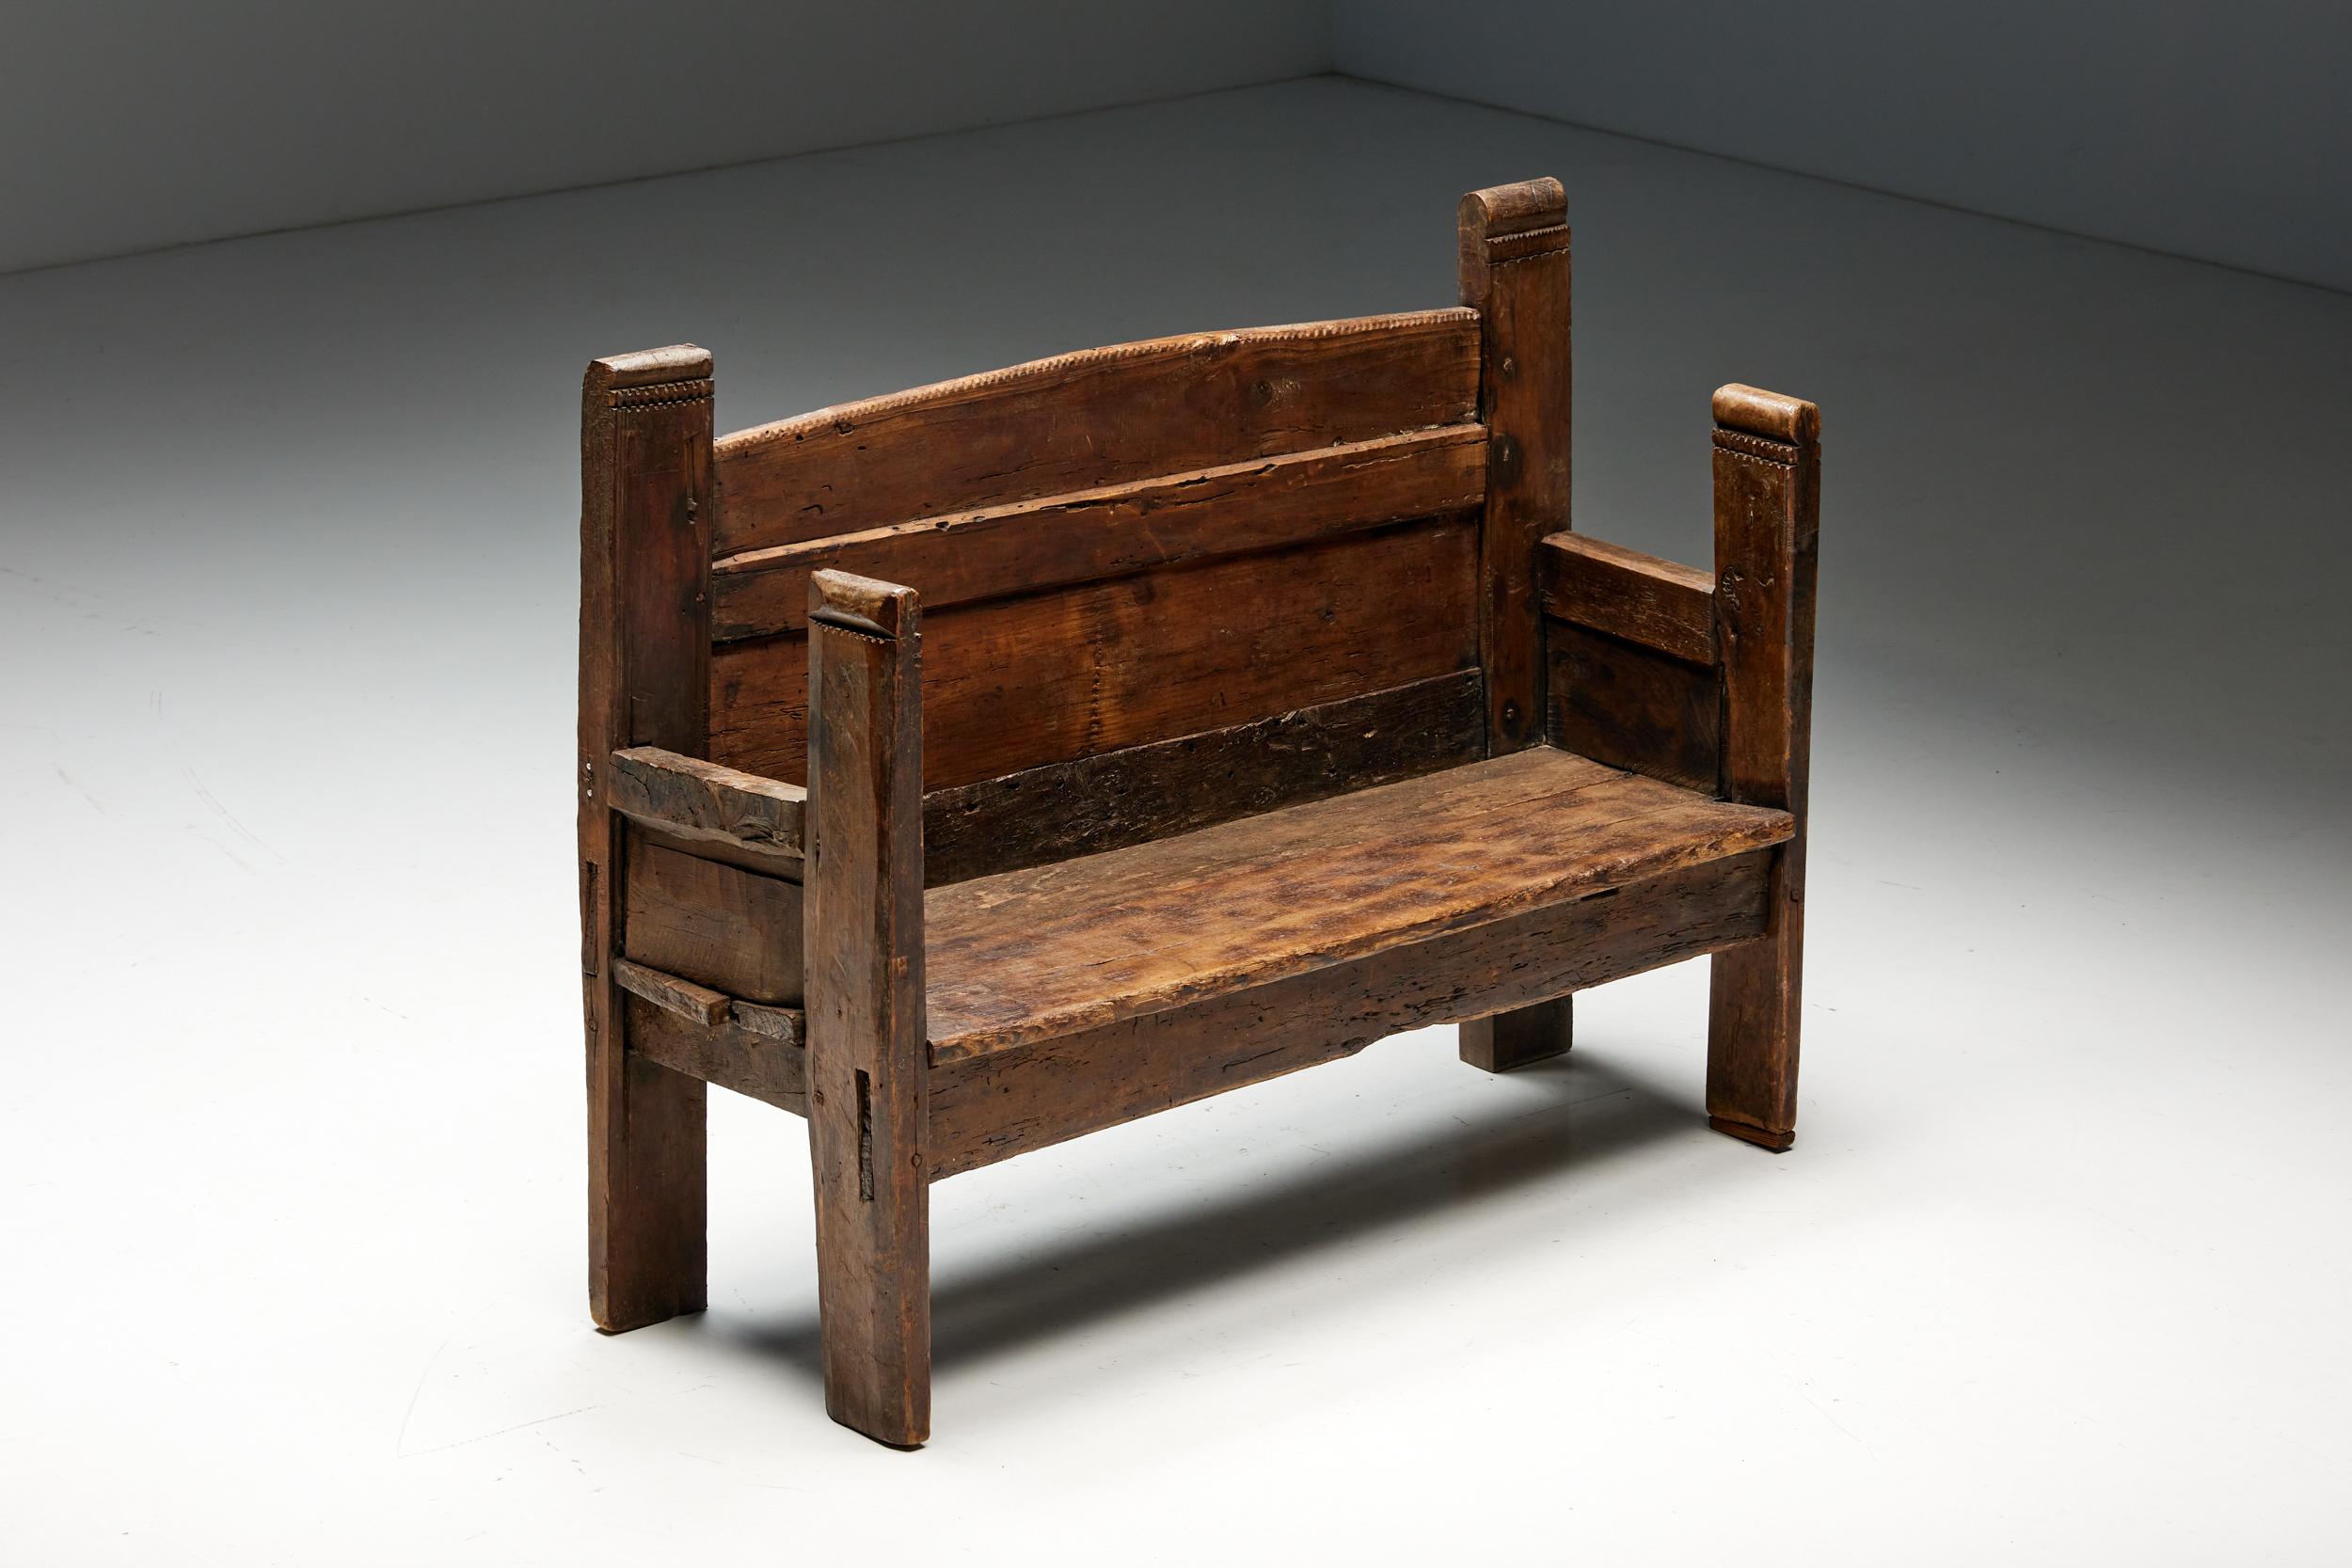 Rustic Folk Art Bench, Spain, 19th Century In Good Condition For Sale In Antwerp, BE